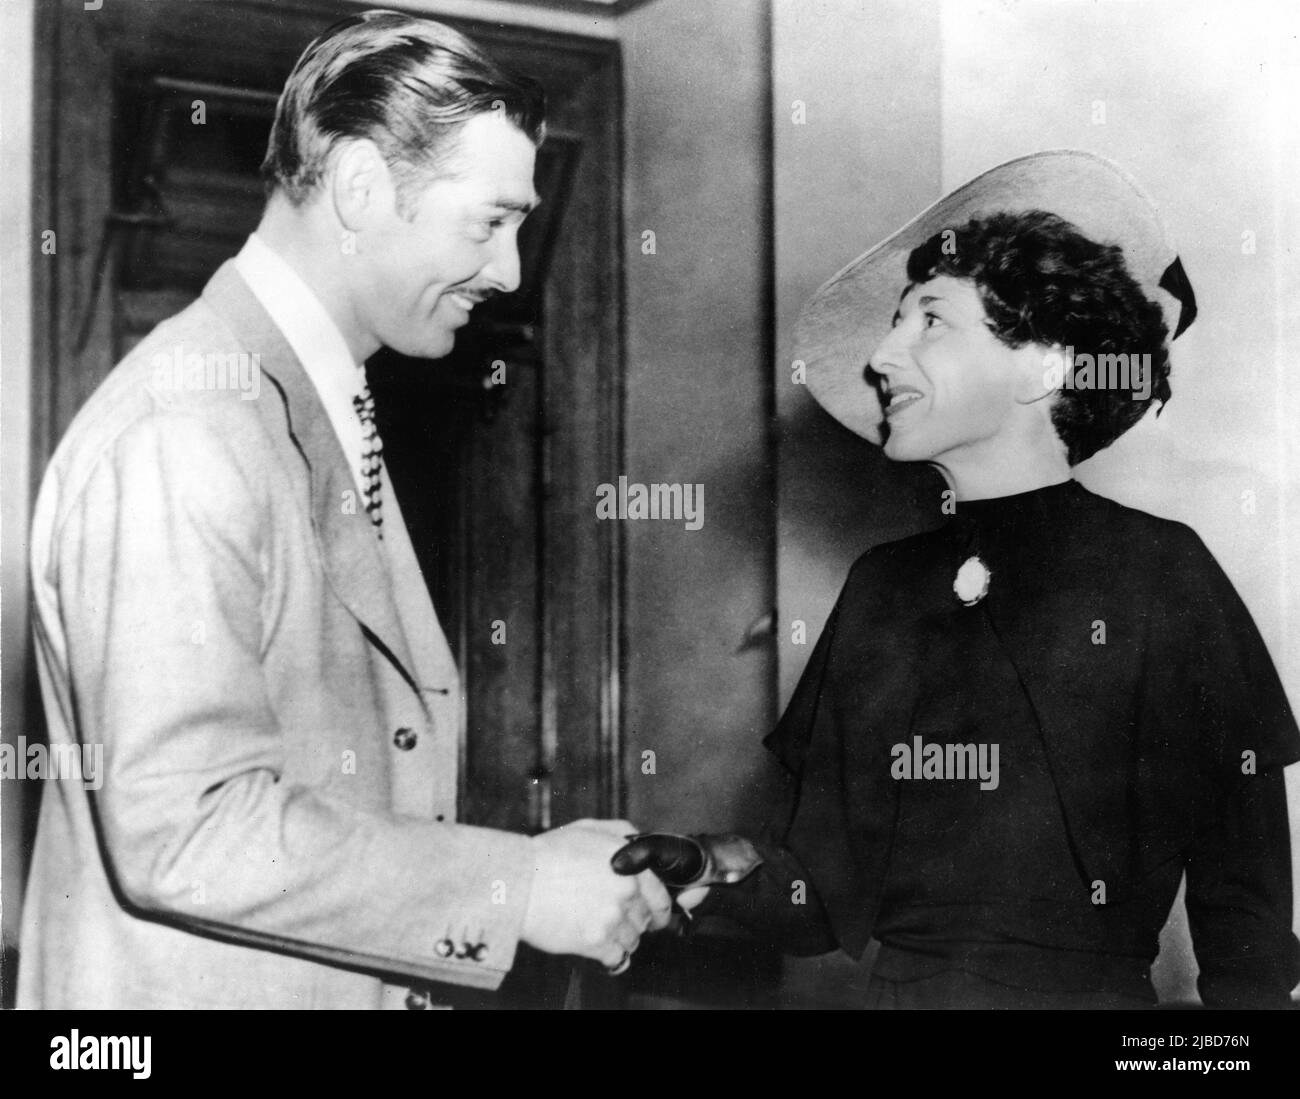 CLARK GABLE in April 1937 meets his old sweetheart FRANZ DORFLER / DOERFLER at a Los Angeles Courtroom when she appeared as a witness on his behalf when he was falsely charged with being the father of the 13 year old daughter of English woman Violet Wells Norton when he was supposedly in England living under the name of Frank Billings in 1922. Stock Photo